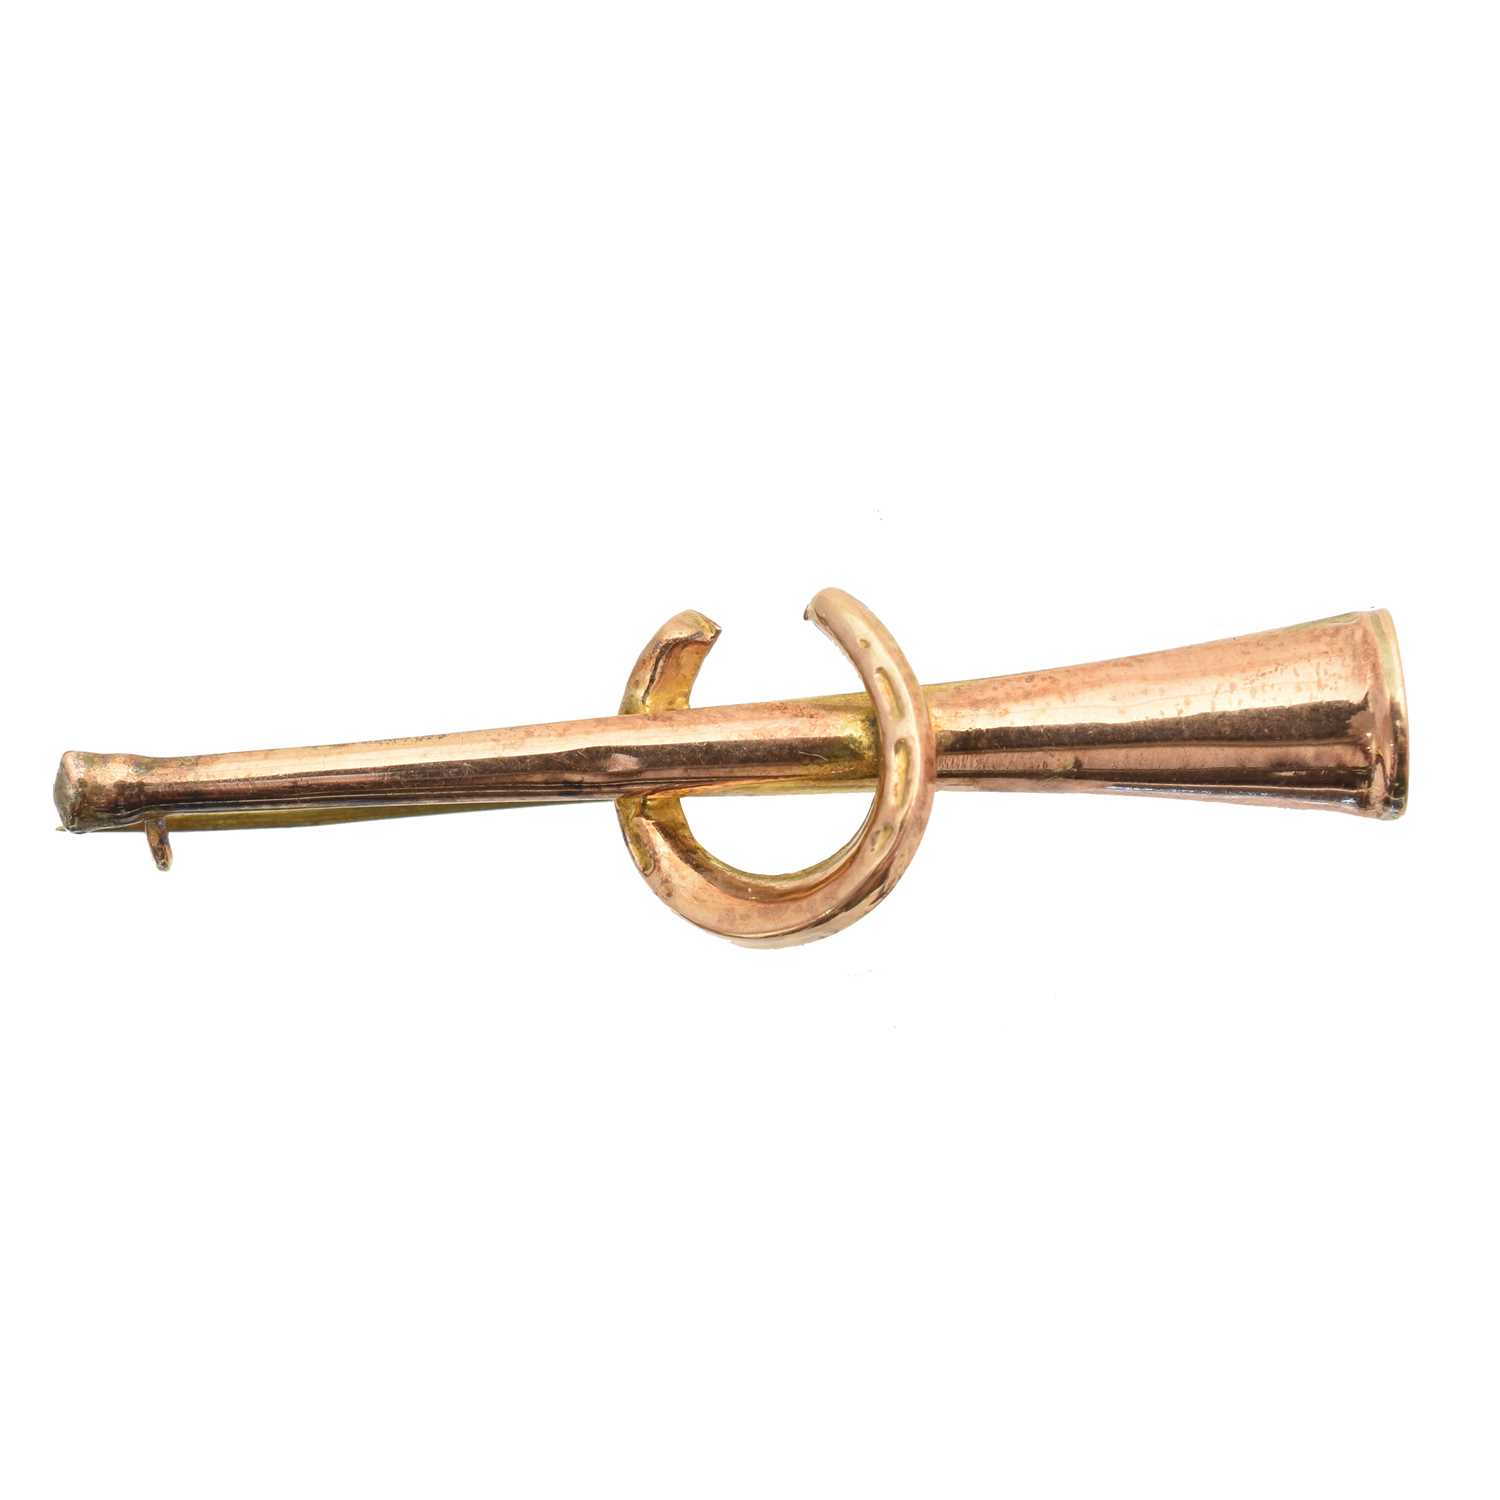 Lot 2 - An early 20th century hunting horn brooch